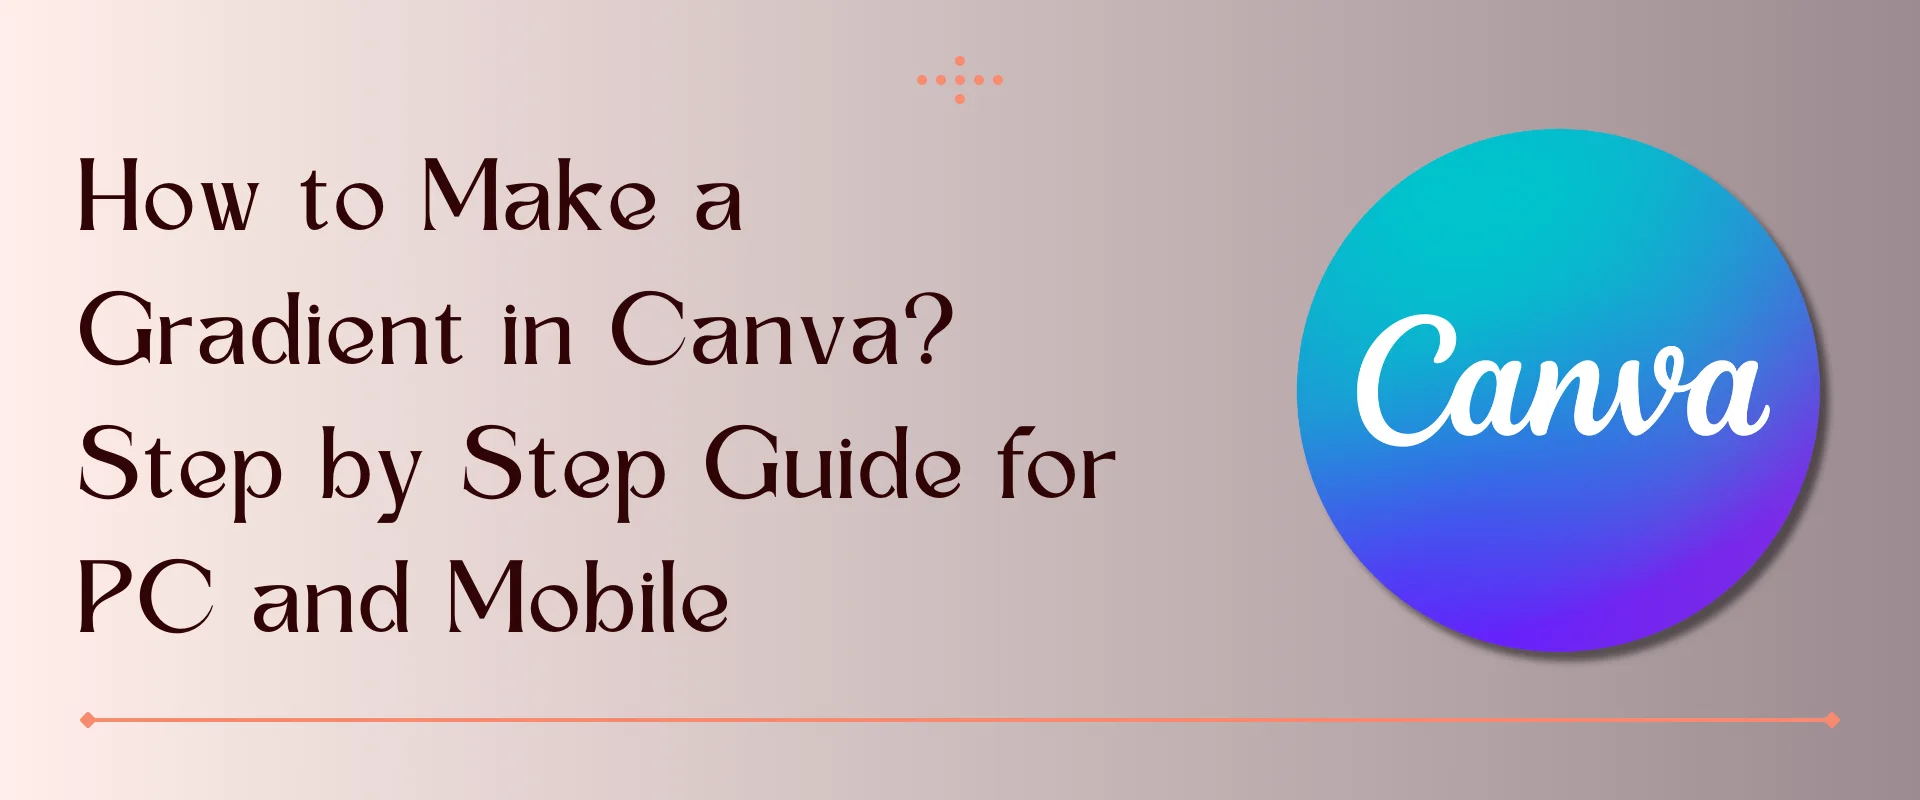 How to Make a Gradient in Canva? Step by Step Guide for PC and Mobile